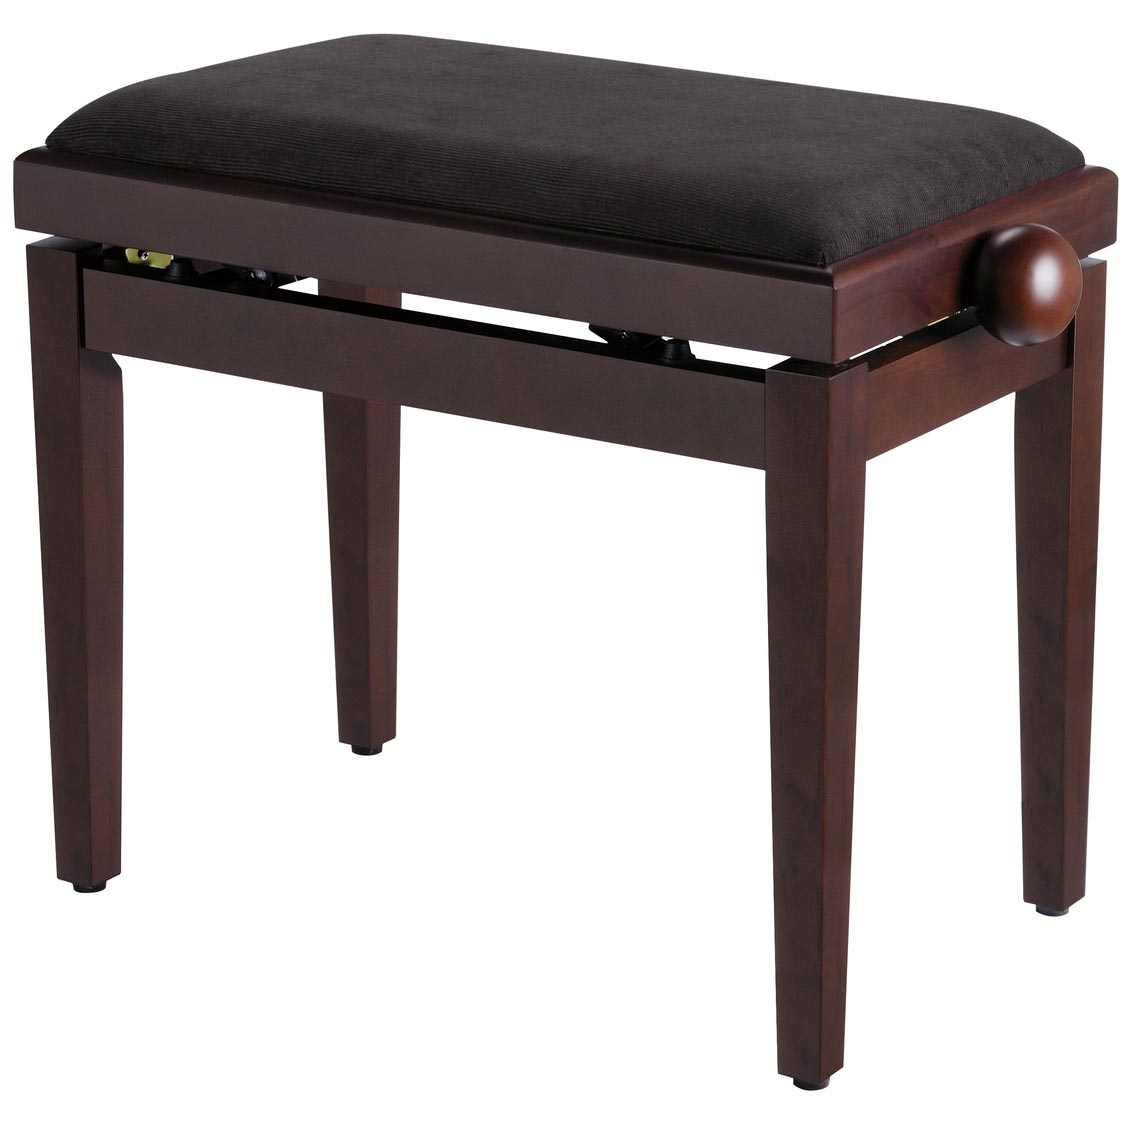 SOUNDSATION SBH-103V Rosewood Piano Bench